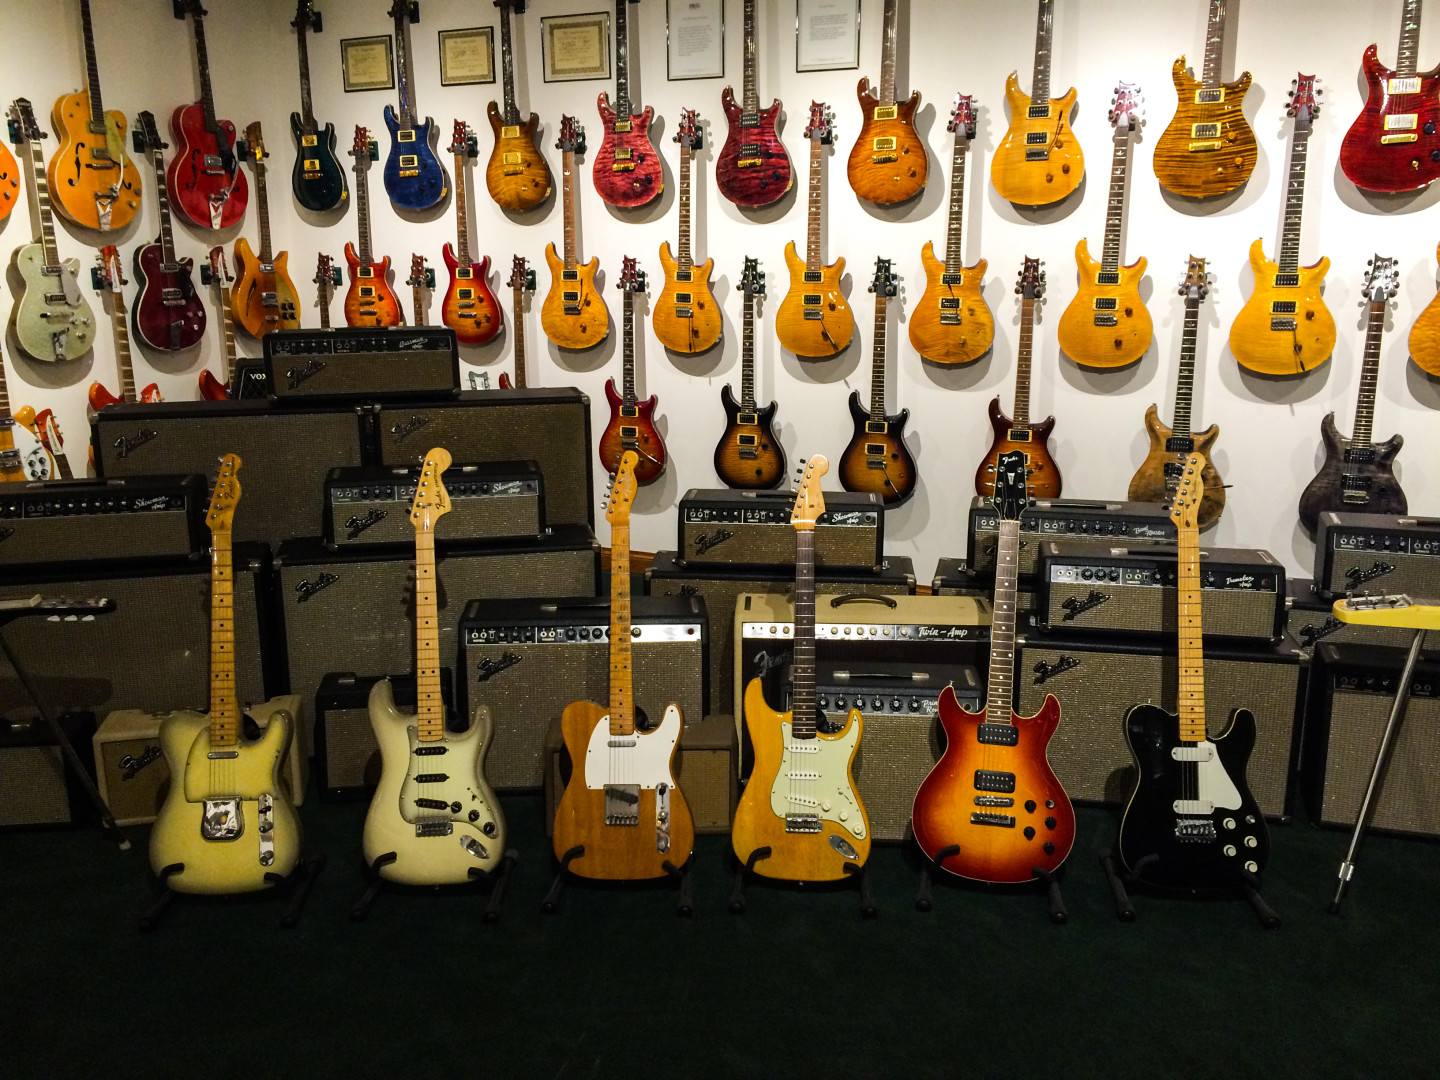 Dave’s Guitars: A Guitar Player’s Paradise in the Middle of Nowhere